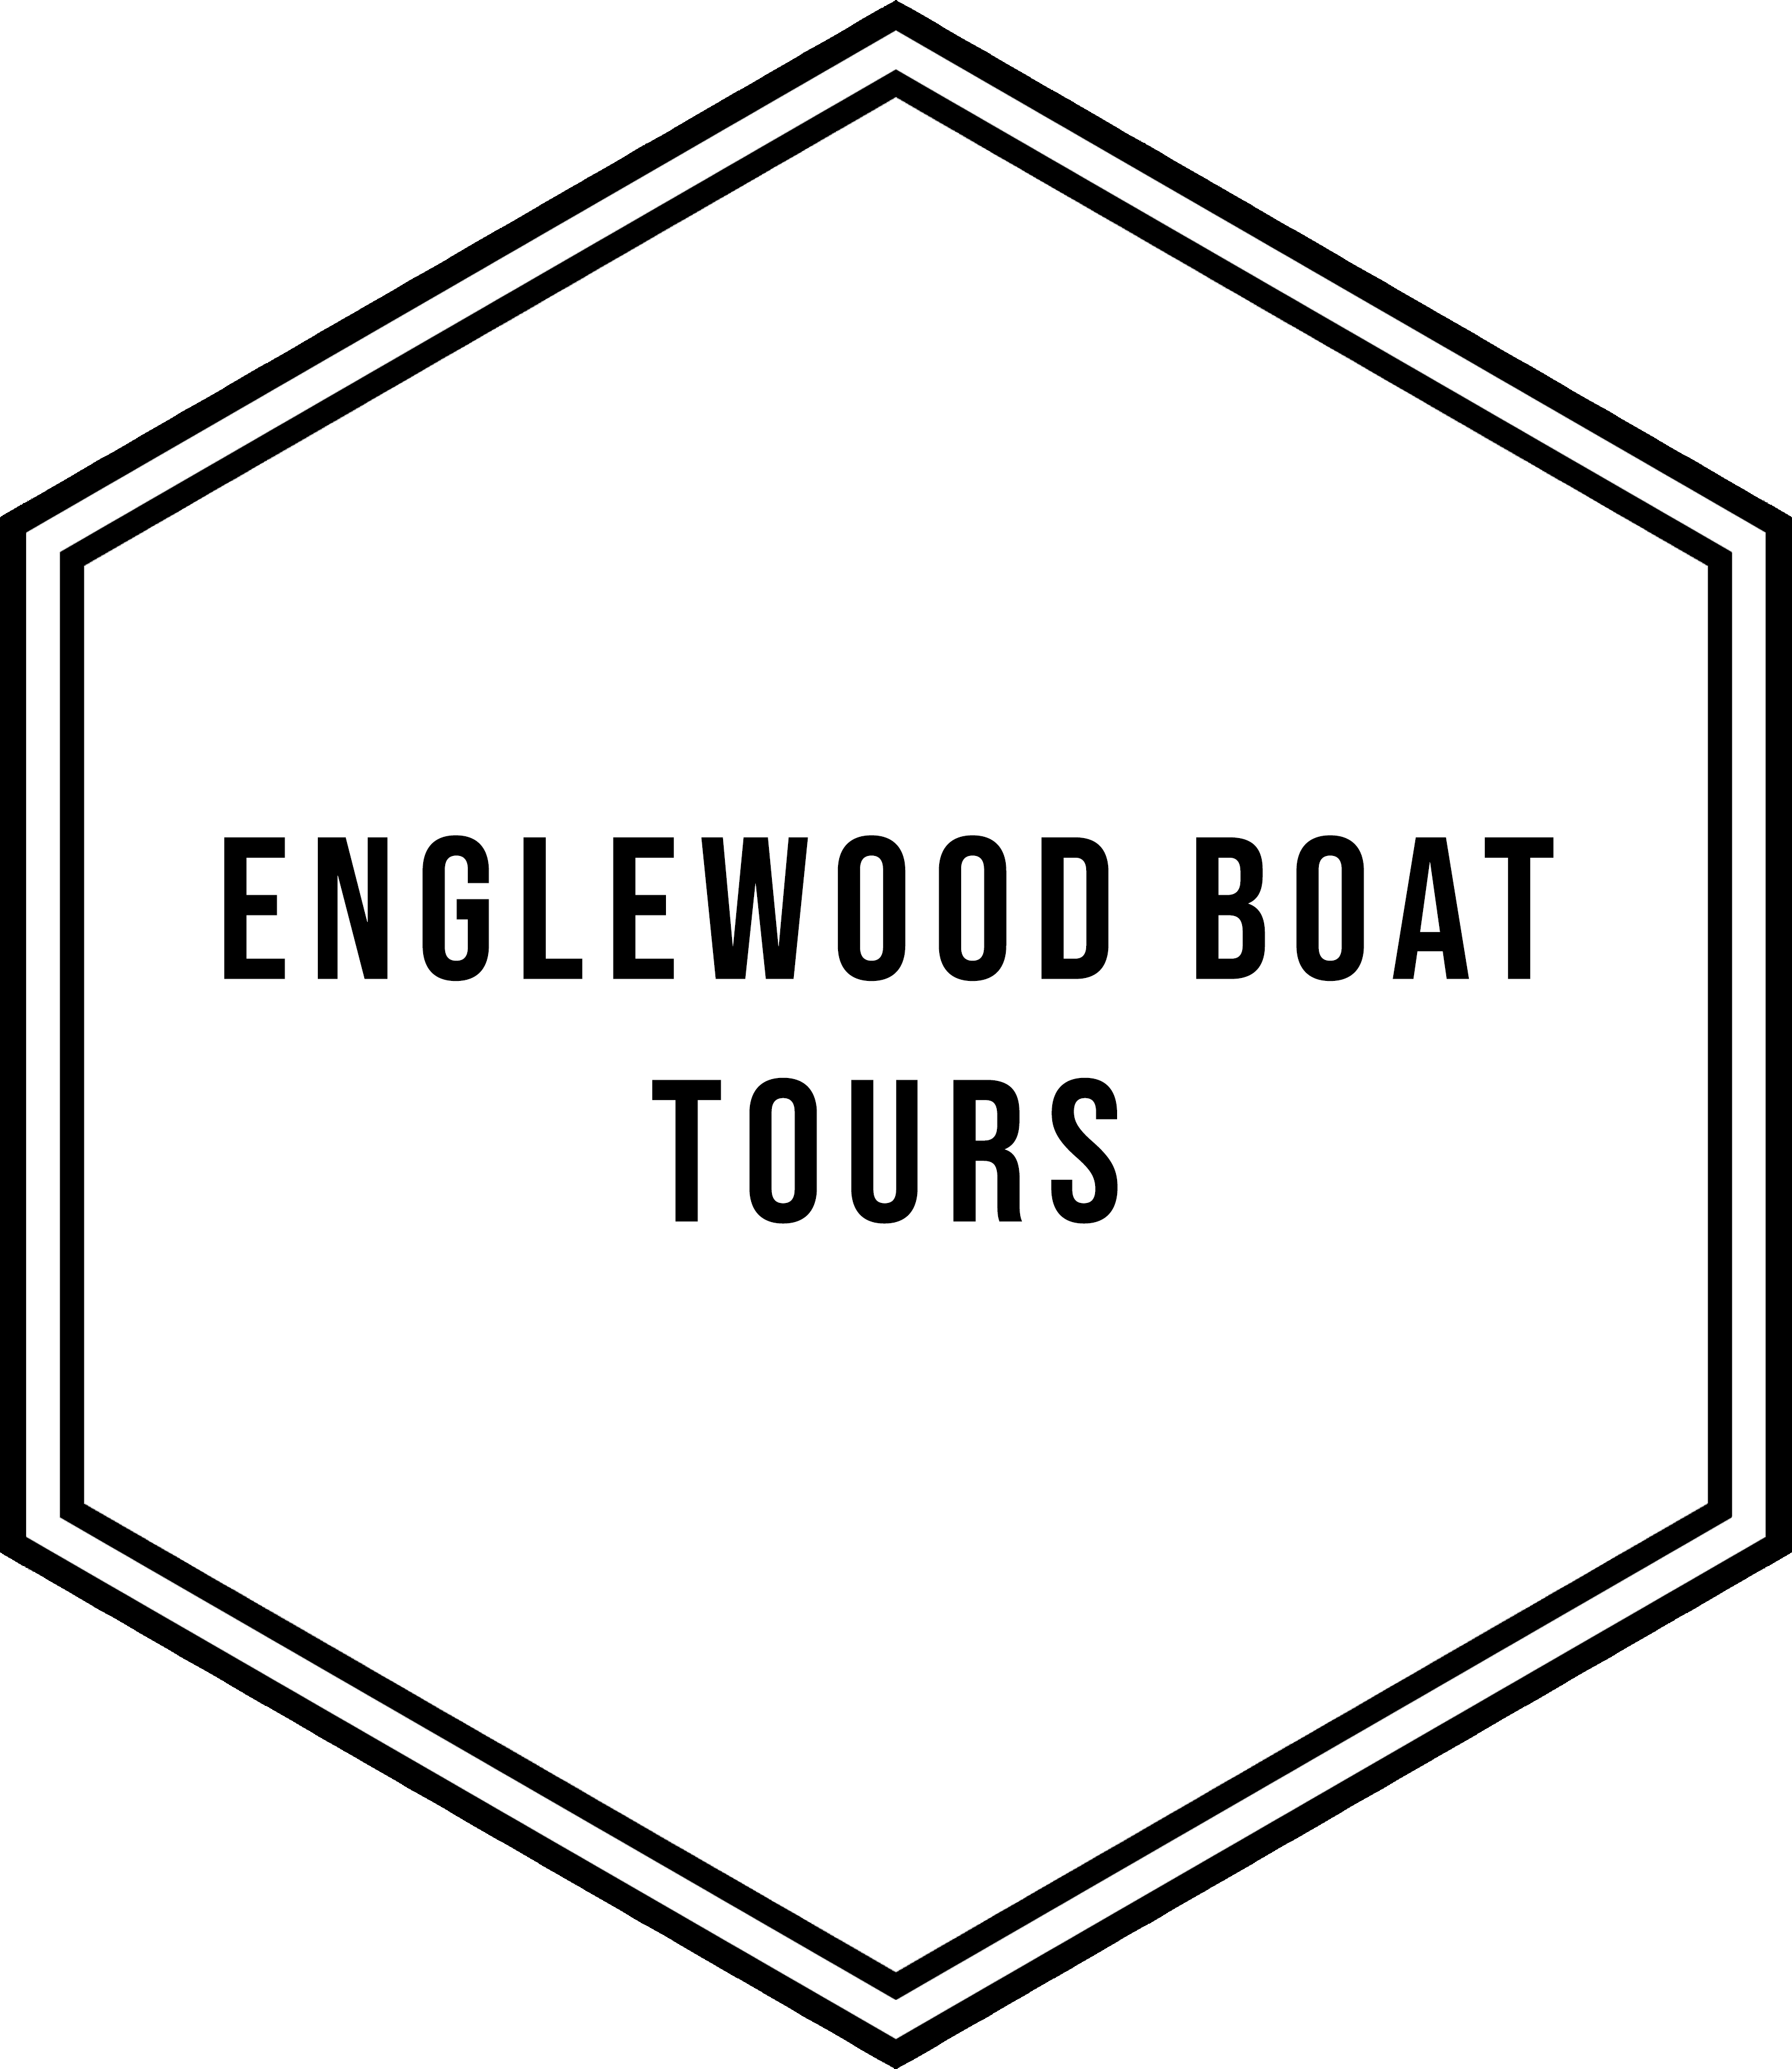 Englewood Boat Tours